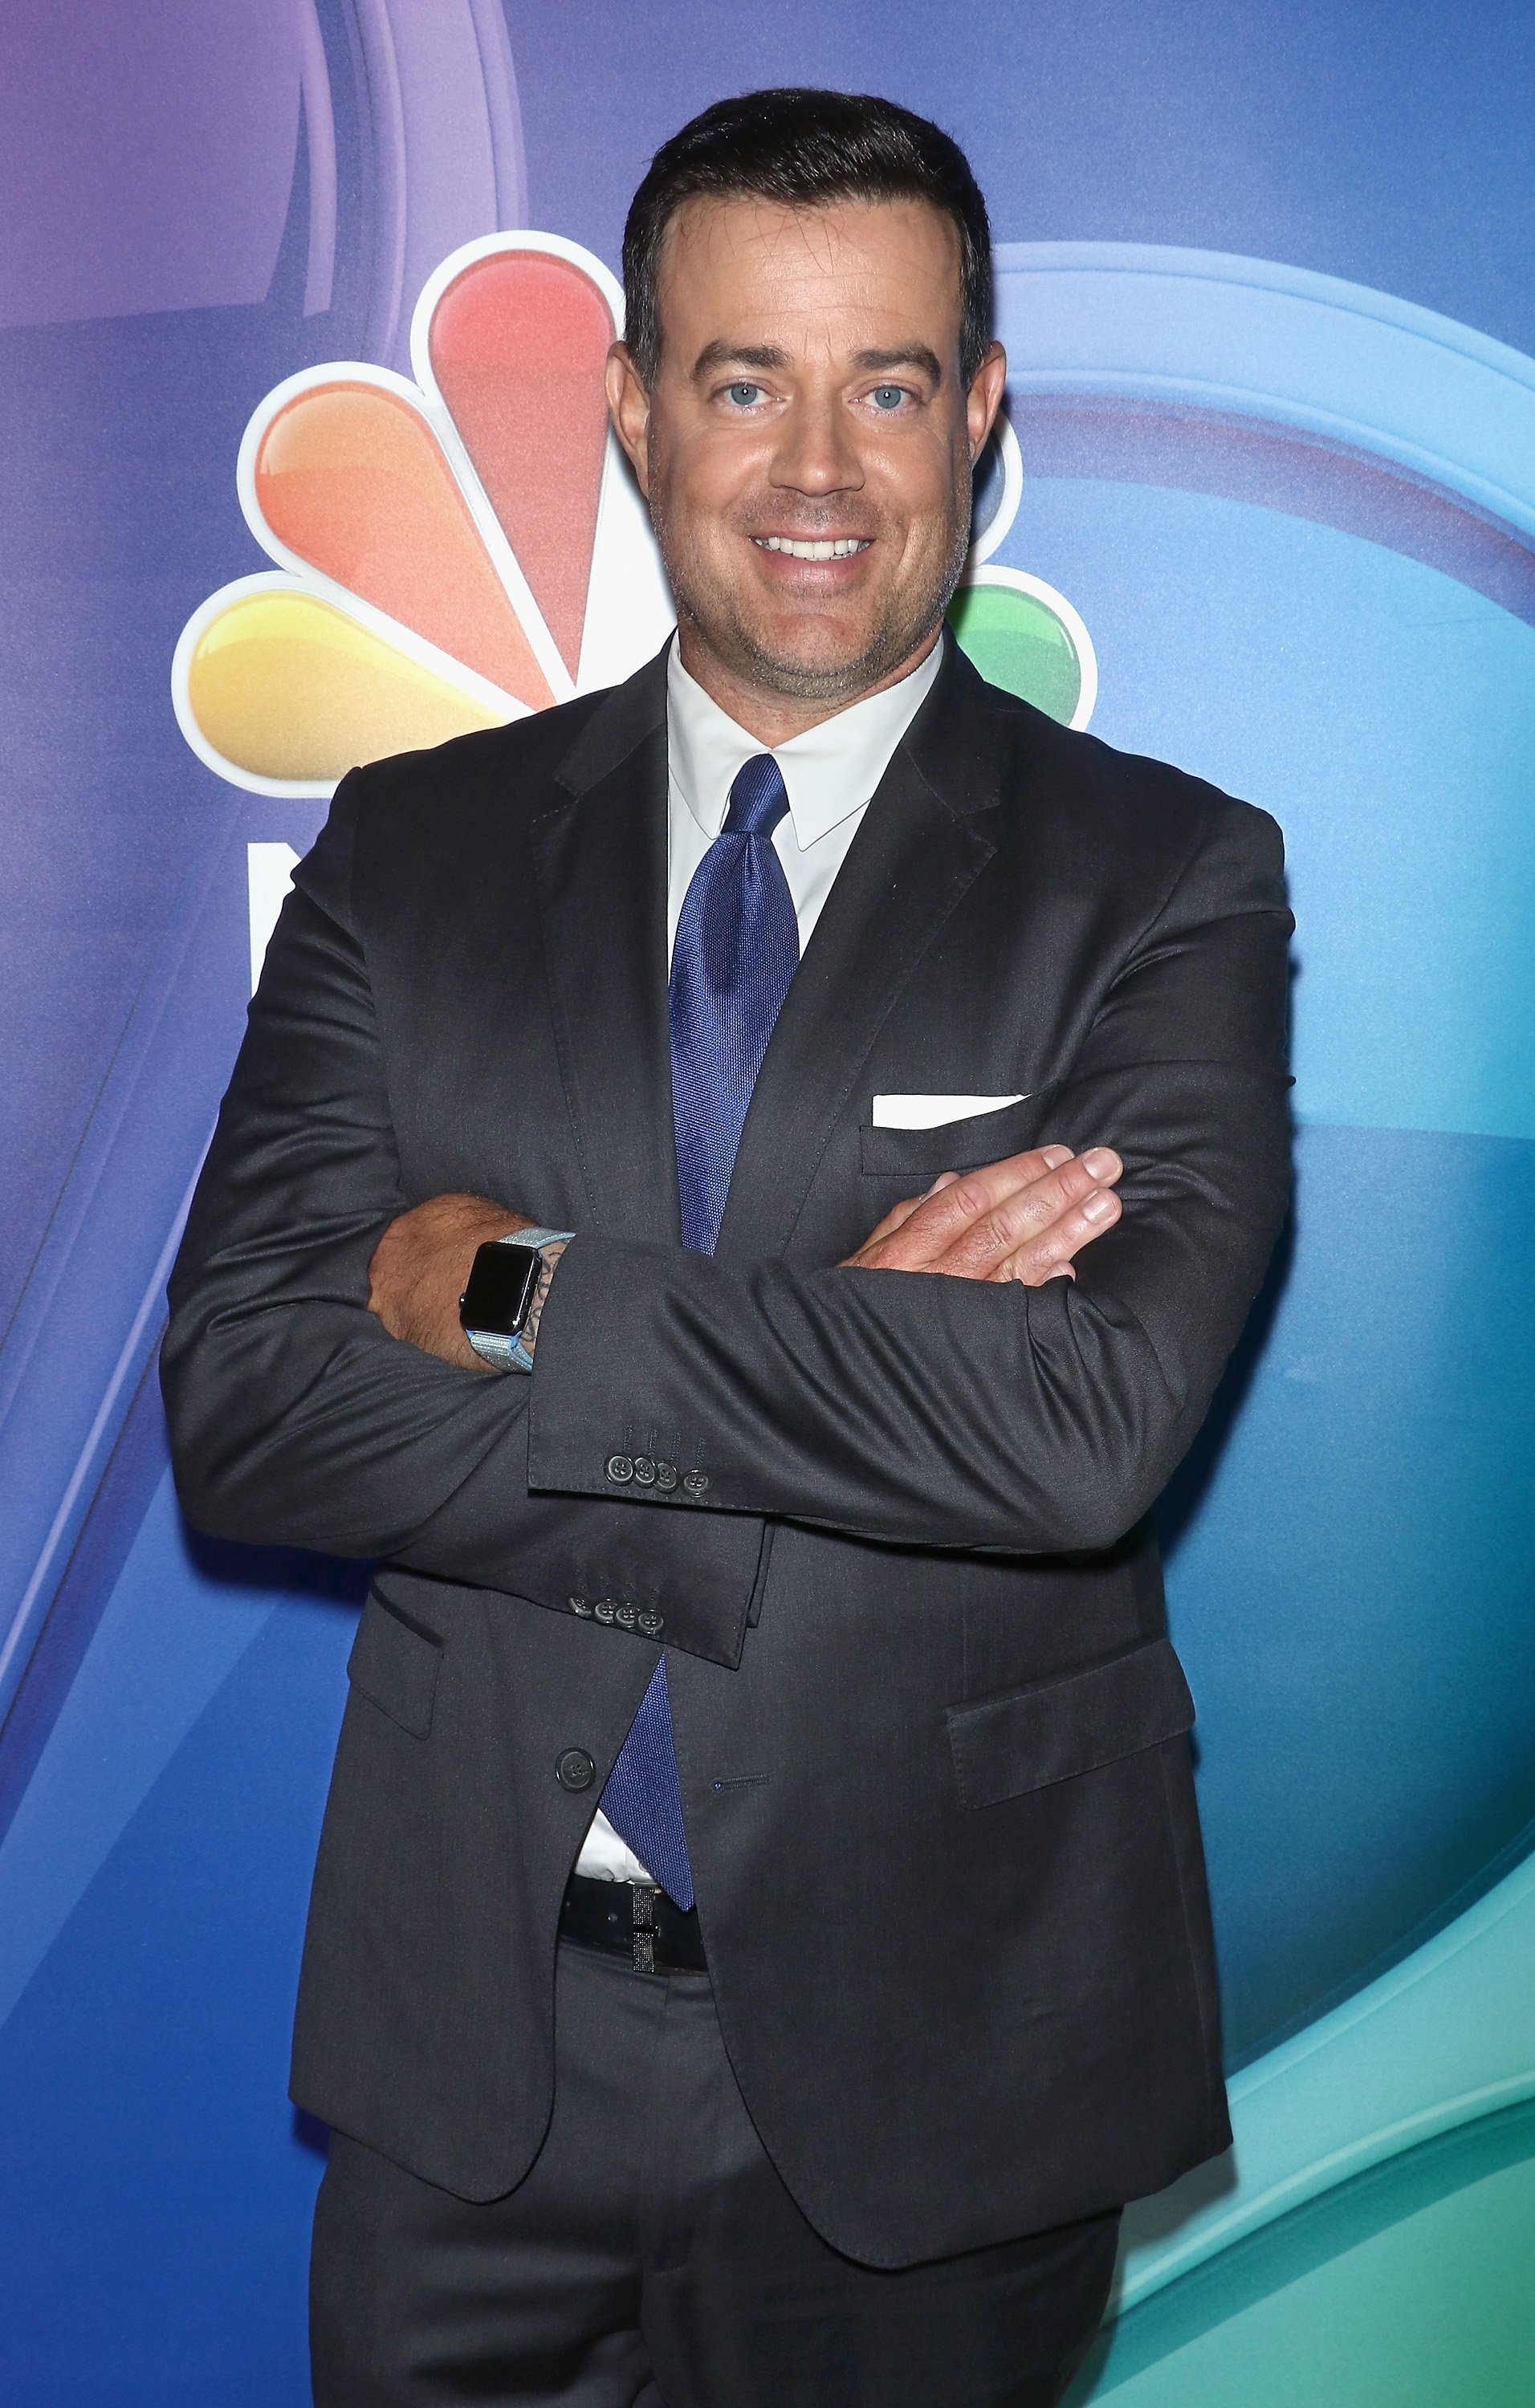 Carson Daly attends the NBC Fall New York Junket on September 6, 2018 | Photo: Getty Images